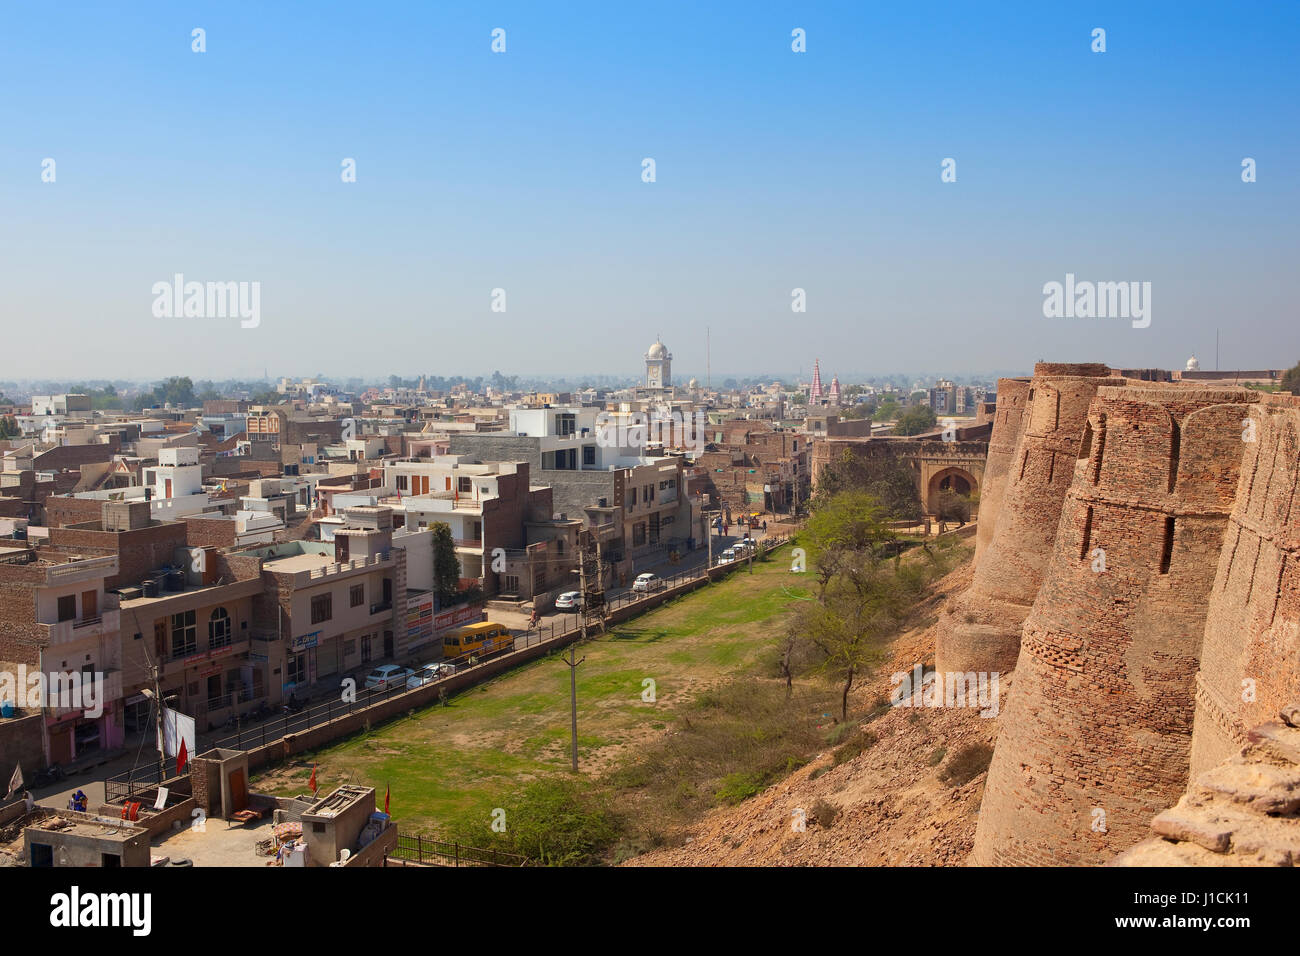 hanumangarh city viewed from bhatner fort walls undergoing restoration work in rajasthan india under a clear blue sky Stock Photo